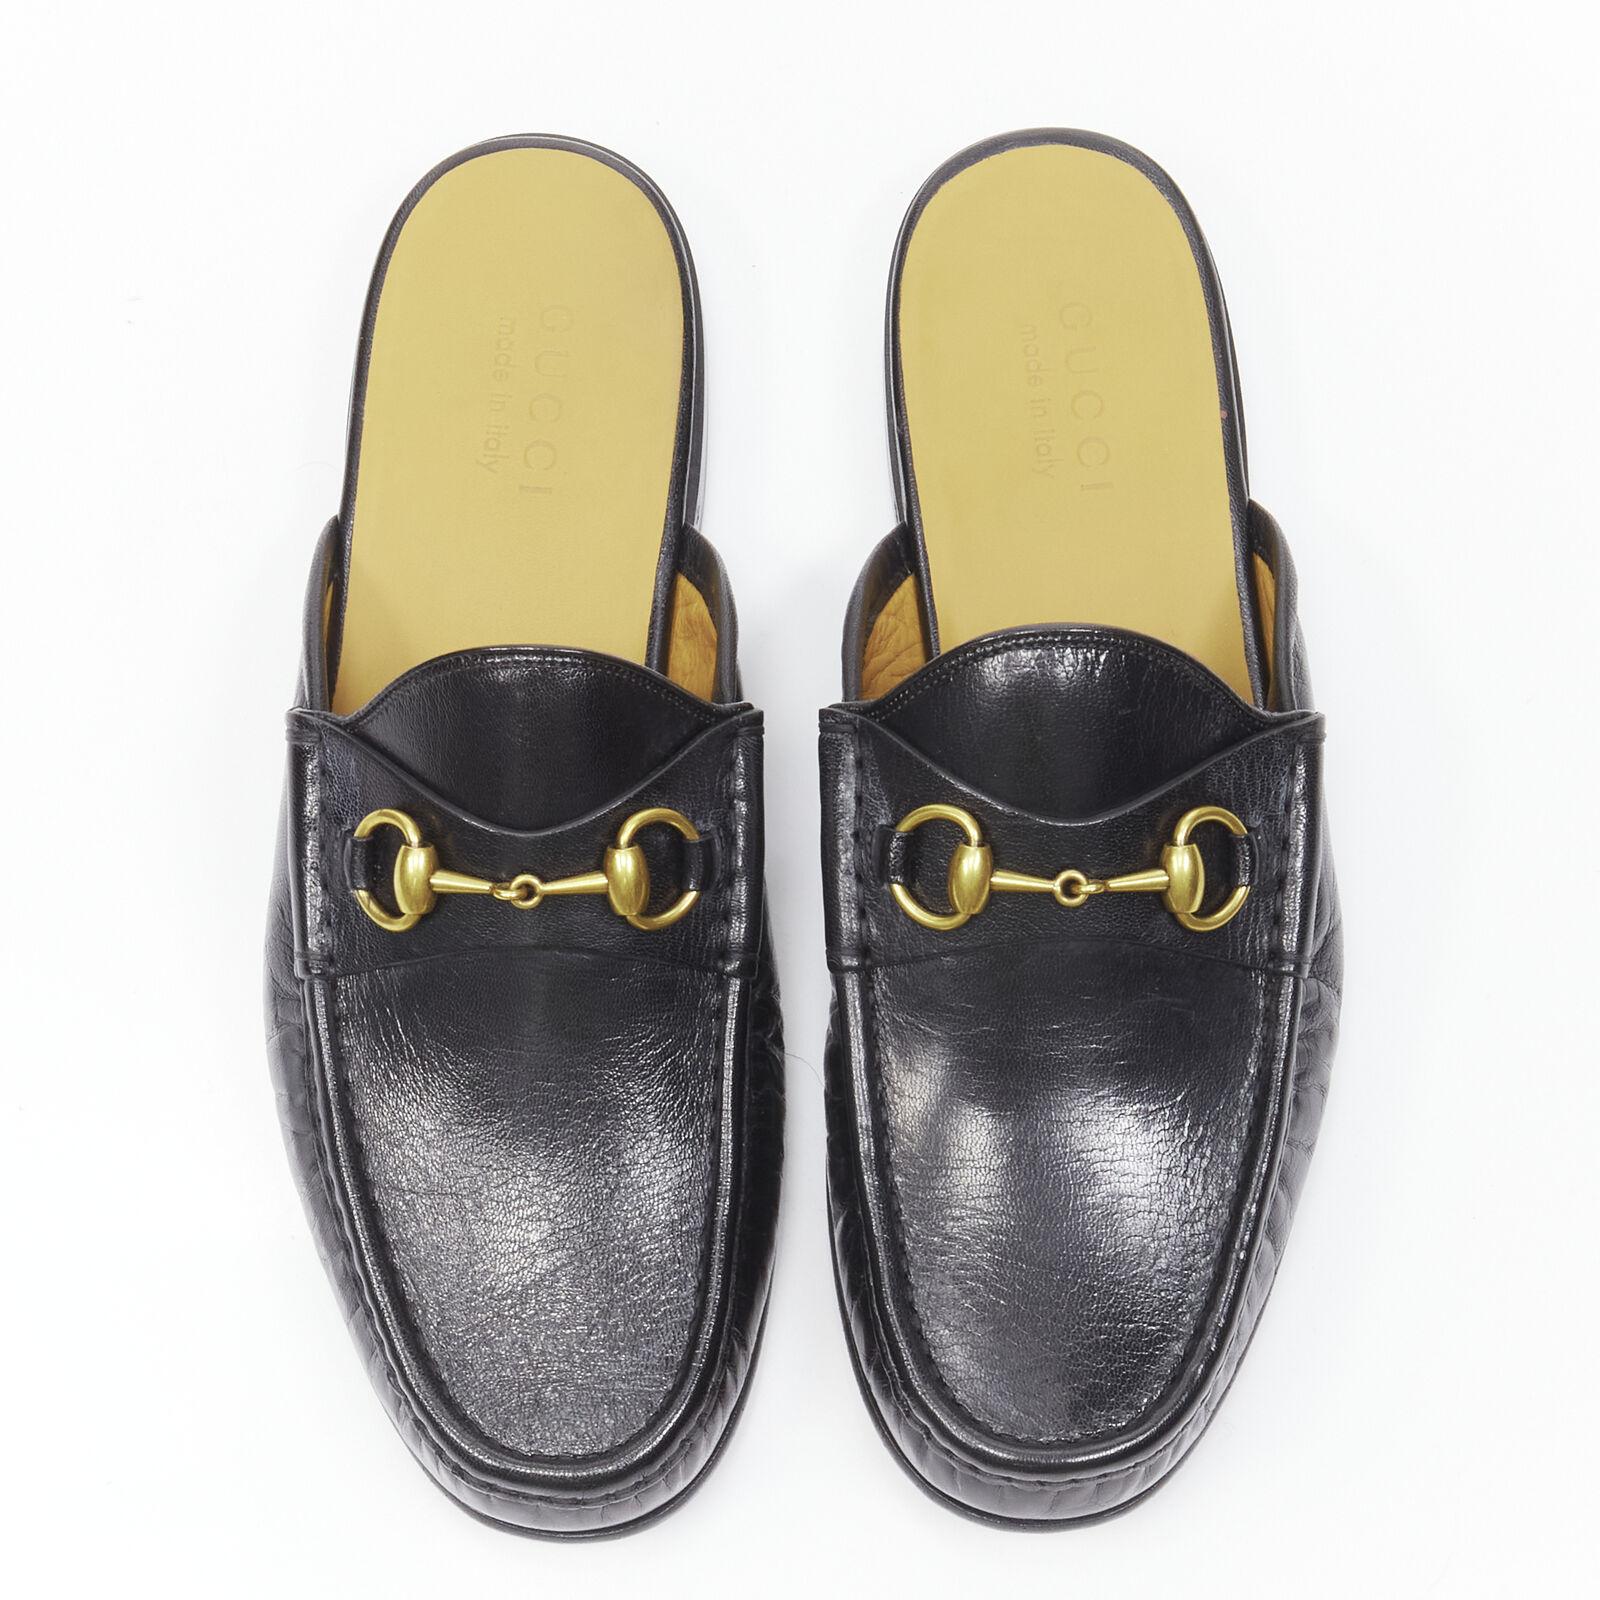 new GUCCI Quentin Nero black leather gold Horsebit slip on loafer EU9.5 EU42.5
Reference: TGAS/B02136
Brand: Gucci
Designer: Alessandro Michele
Model: Quentin
Collection: Runway
Material: Leather
Color: Black
Pattern: Solid
Lining: Leather
Extra